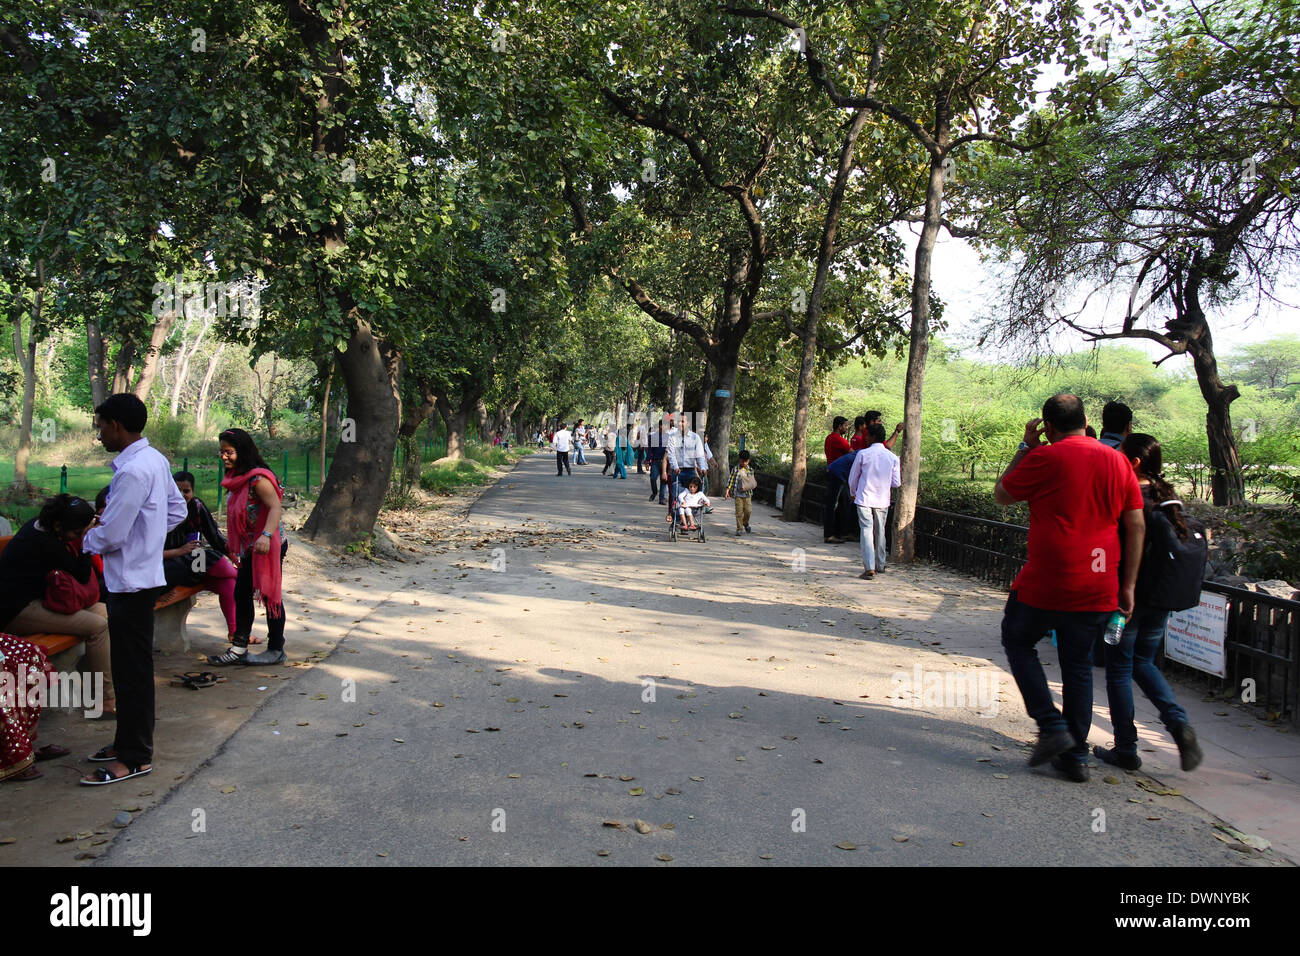 Visitors inside Delhi Zoo on tree lined road, some walking along and others watching animal enclosures on both sides of the road Stock Photo